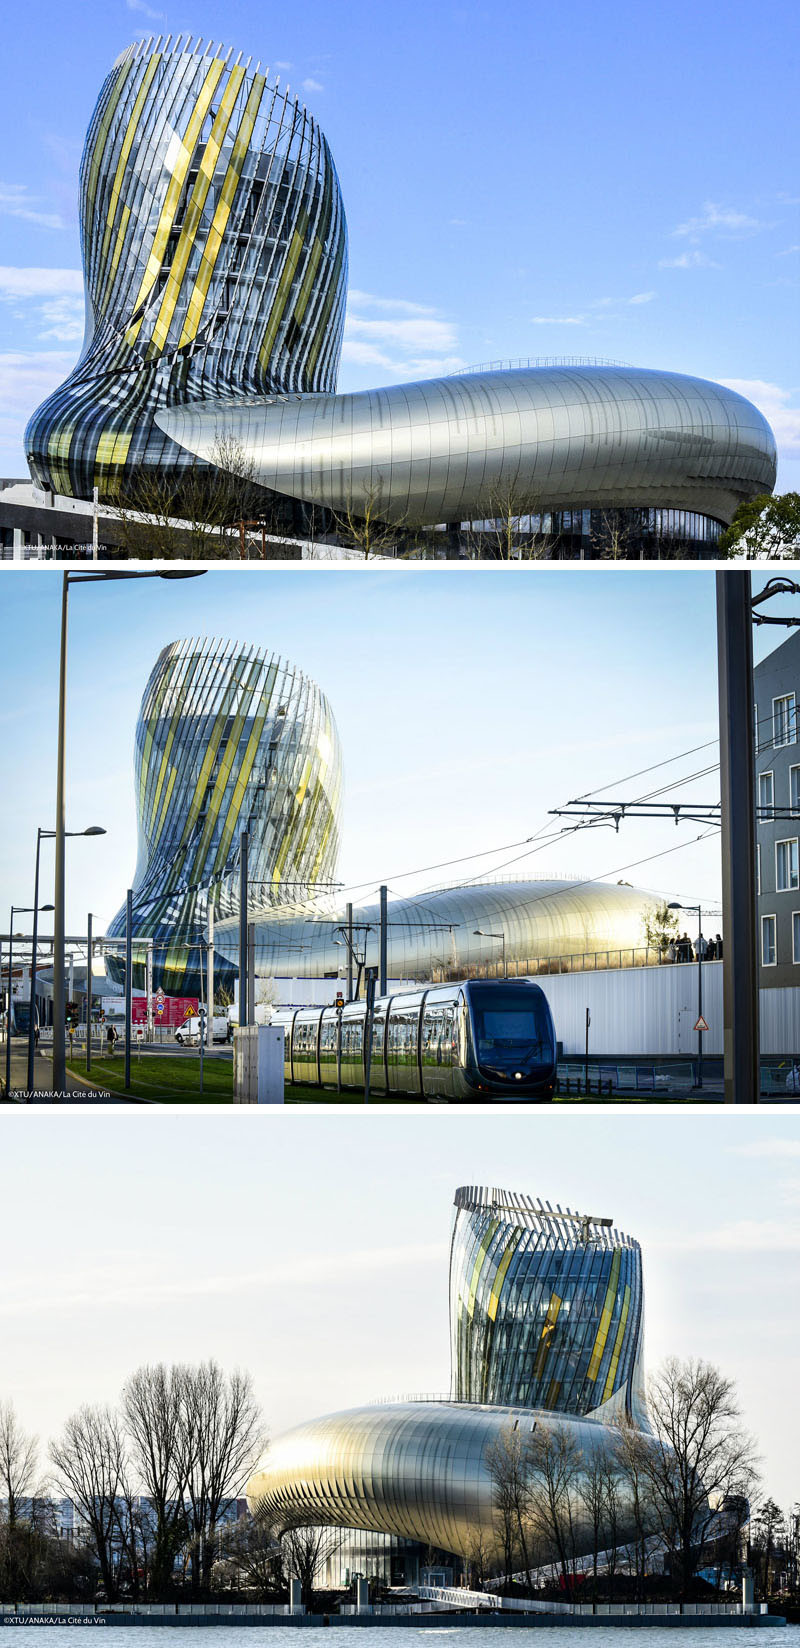 "La Cite du Vin", or "the City of Wine", is a mix between a theme park and a museum all about WINE opening June 1, in Bordeaux, France, the wine capital of the world.